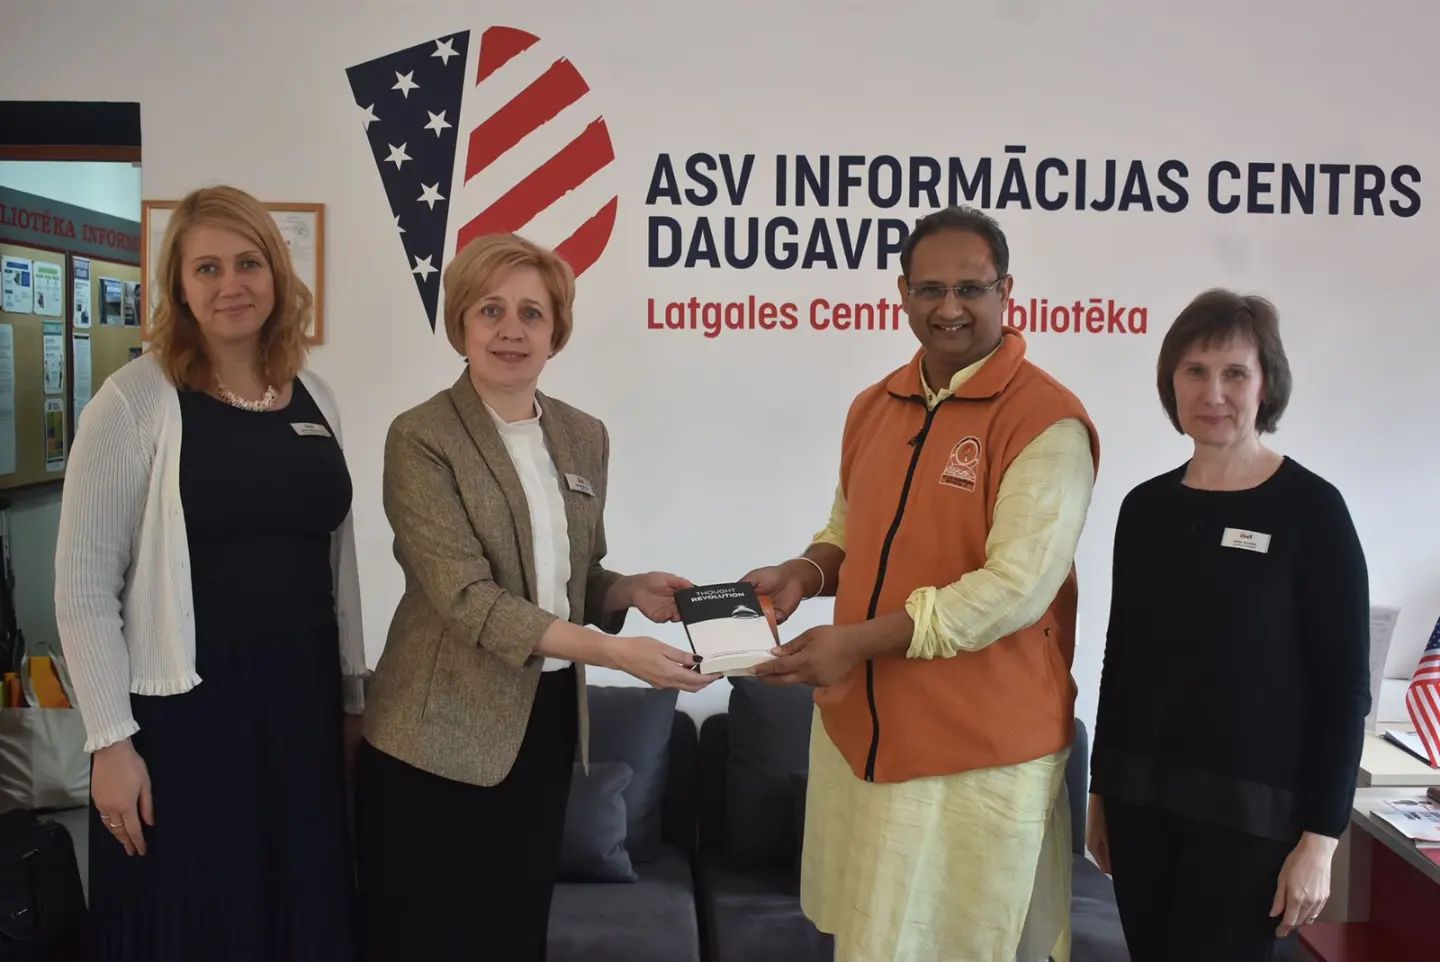 The US Embassy in Daugavpils invited respected Dr Chinmay Pandya Ji to its Information Centre on his visit to Latvia